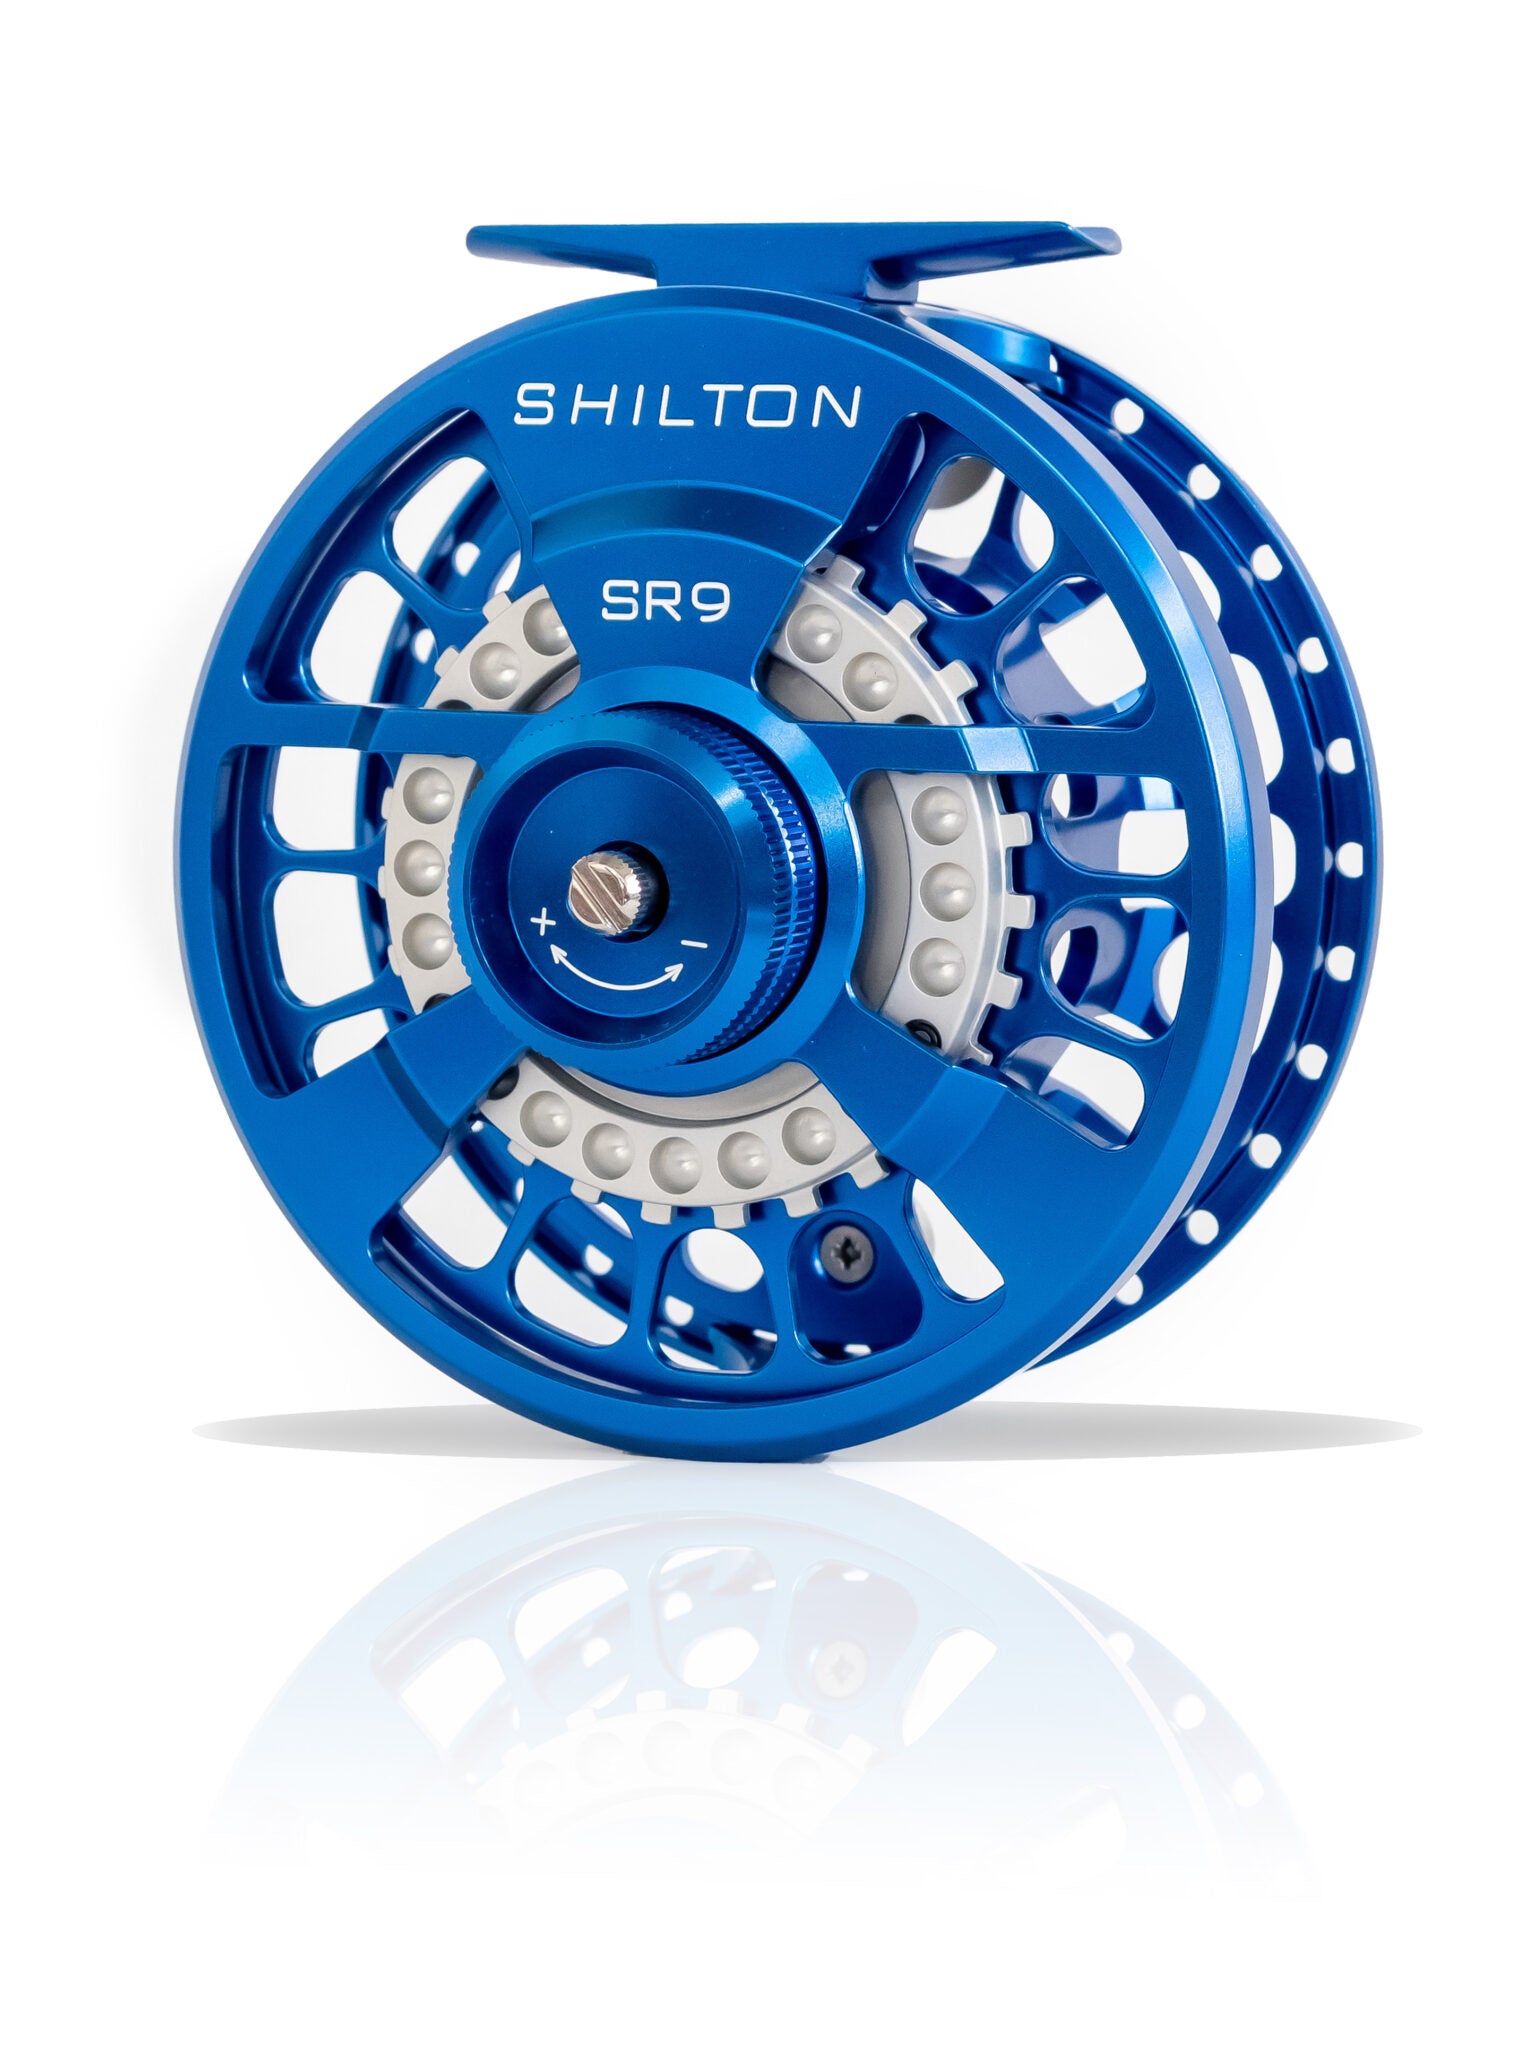 Hatch Iconic 9 Plus Campfire Orange Special Limited Edition Fly Reels